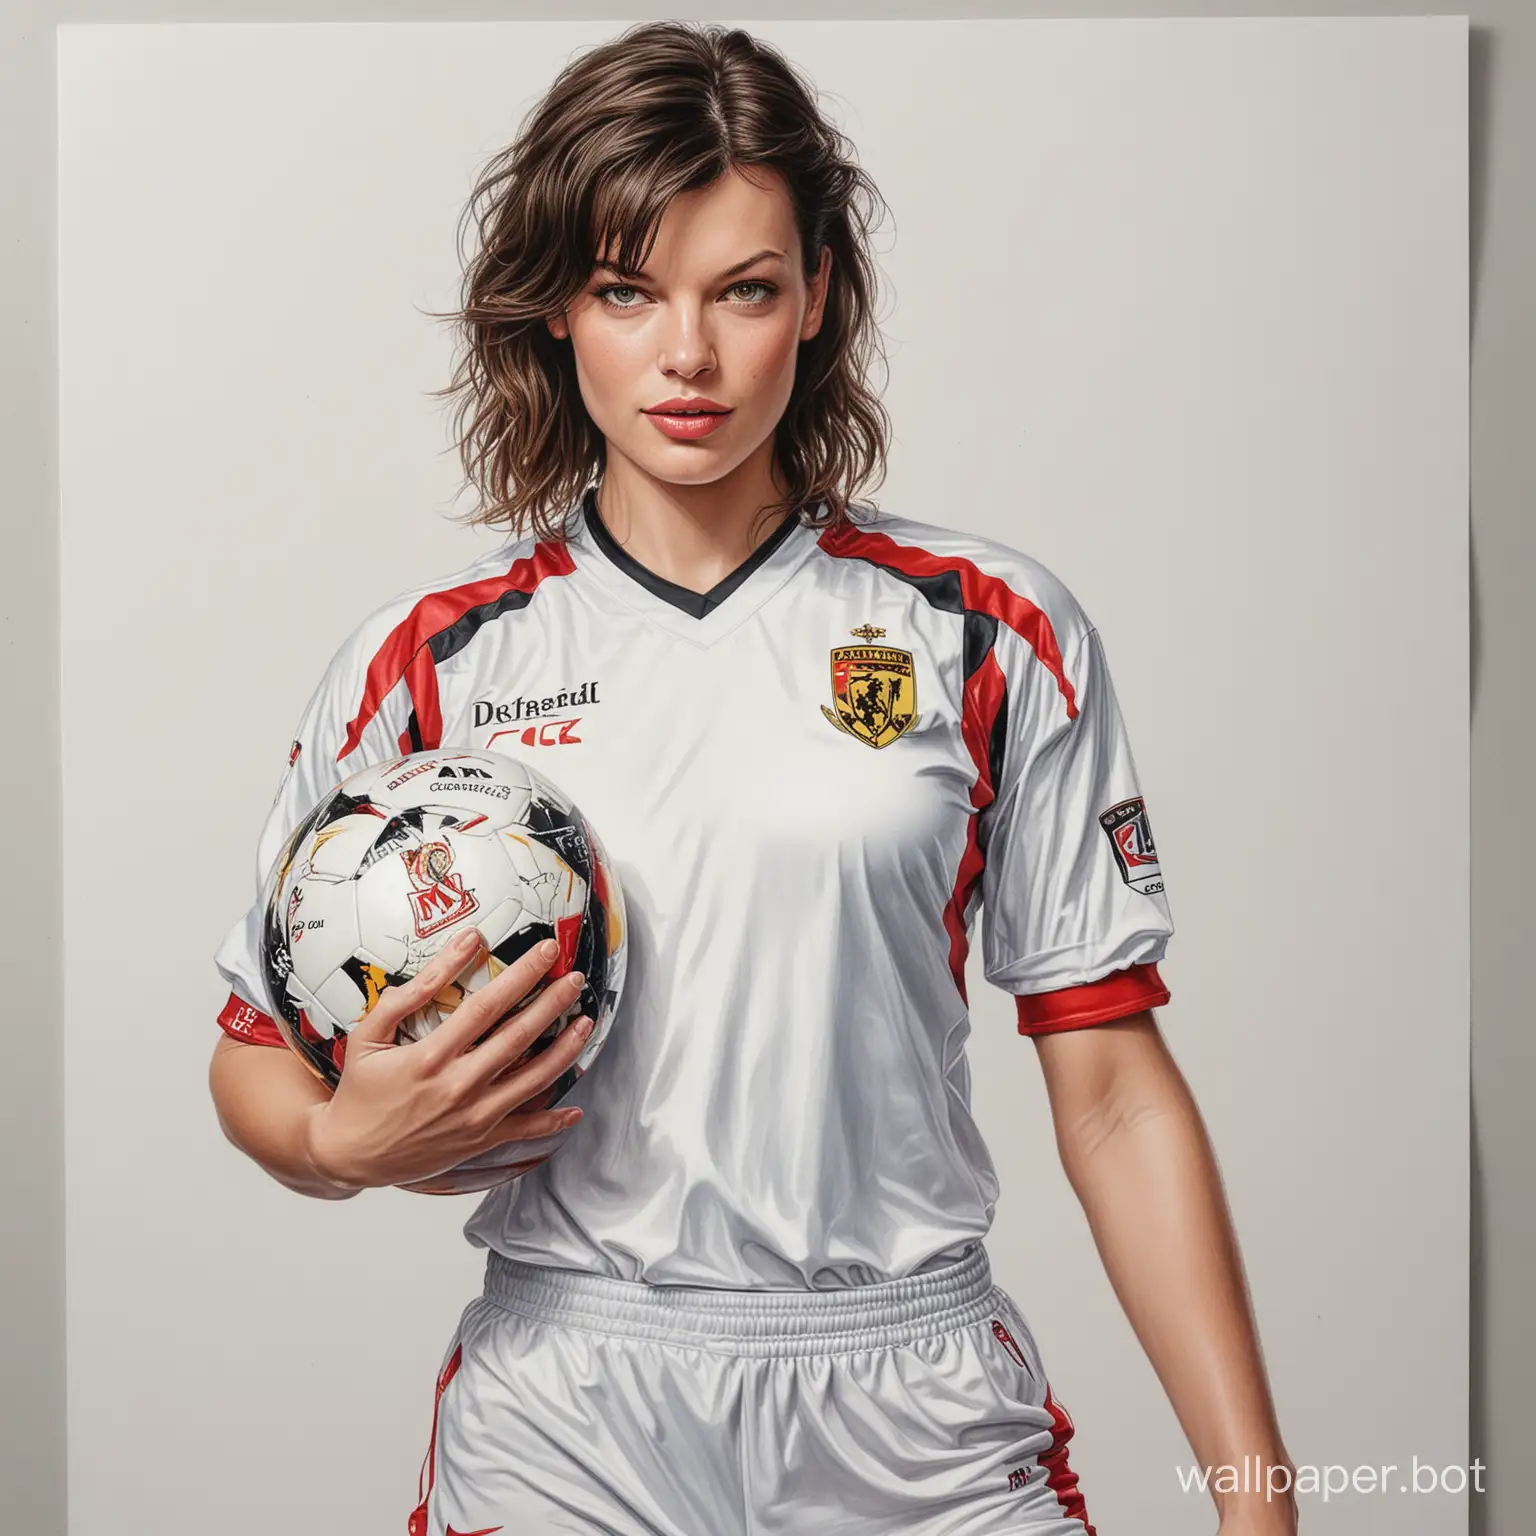 sketch young Milla Jovovich 26 years old dark hair 4 chest size narrow waist in football uniform MK DONS holds a big champions cup white background high realism drawing with a colored marker sexy